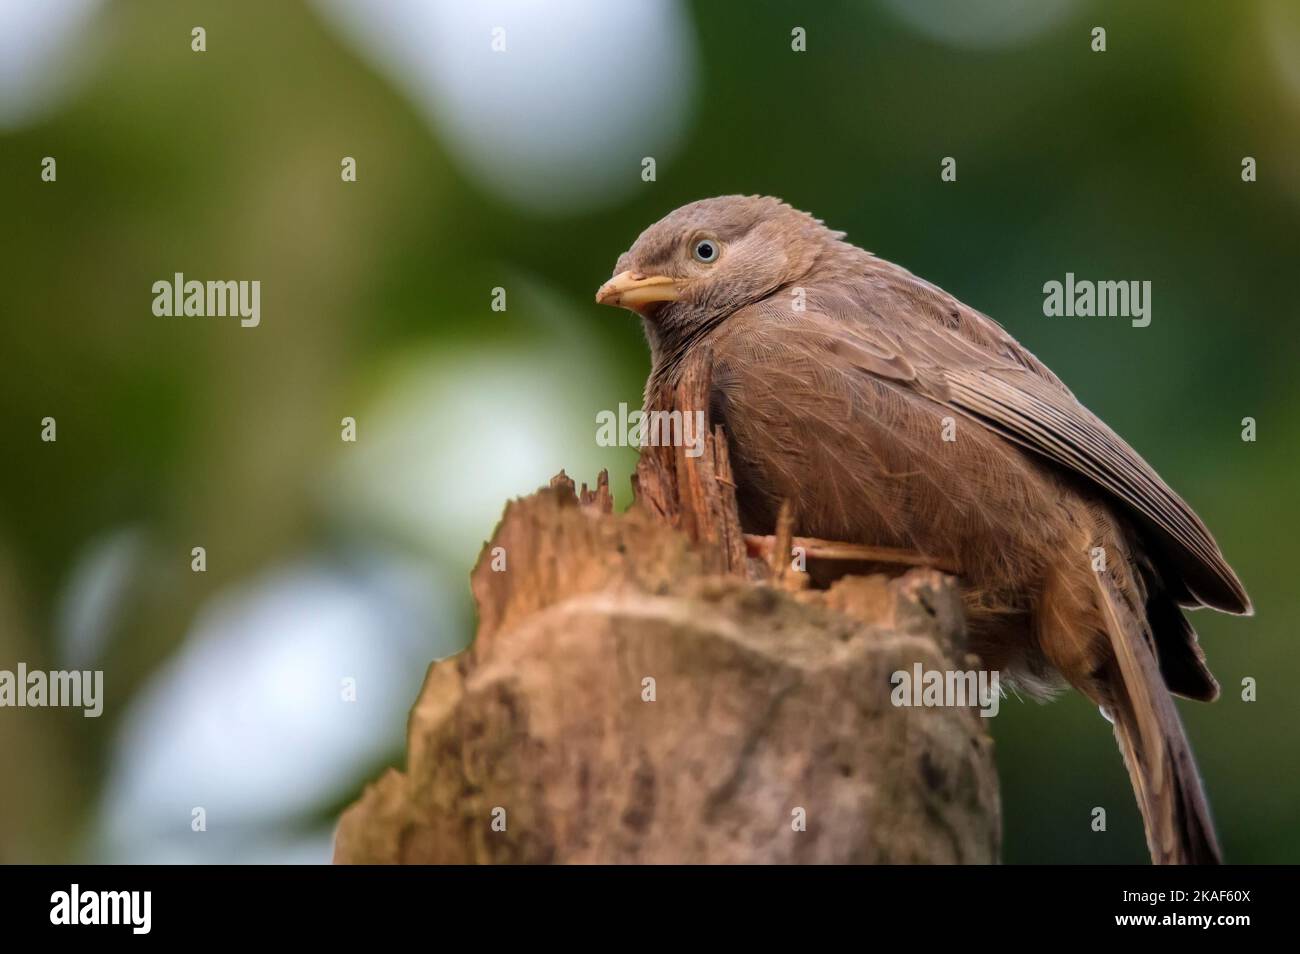 Yellow-billed babbler or Argya affinis perches on a tree Stock Photo